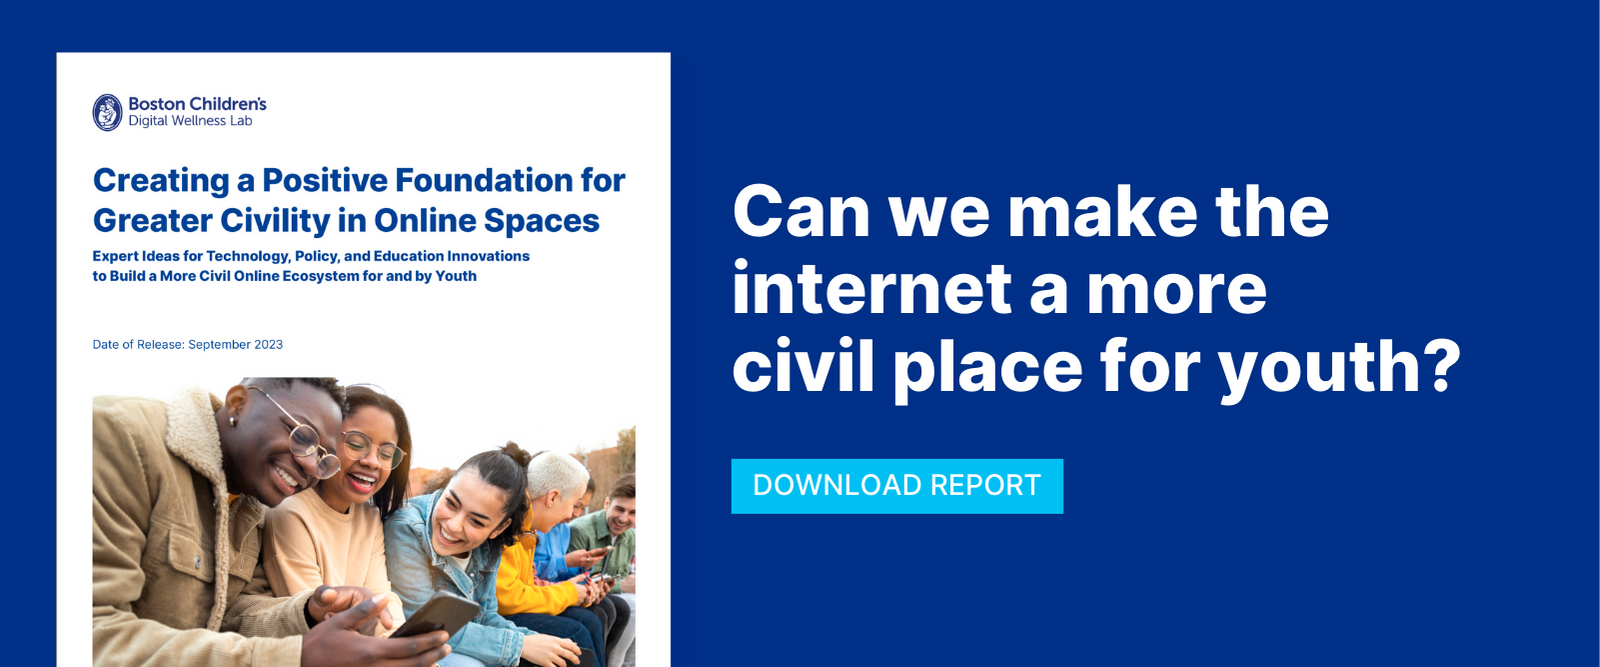 Civility Report - Can we make the internet a more civil place for youth?